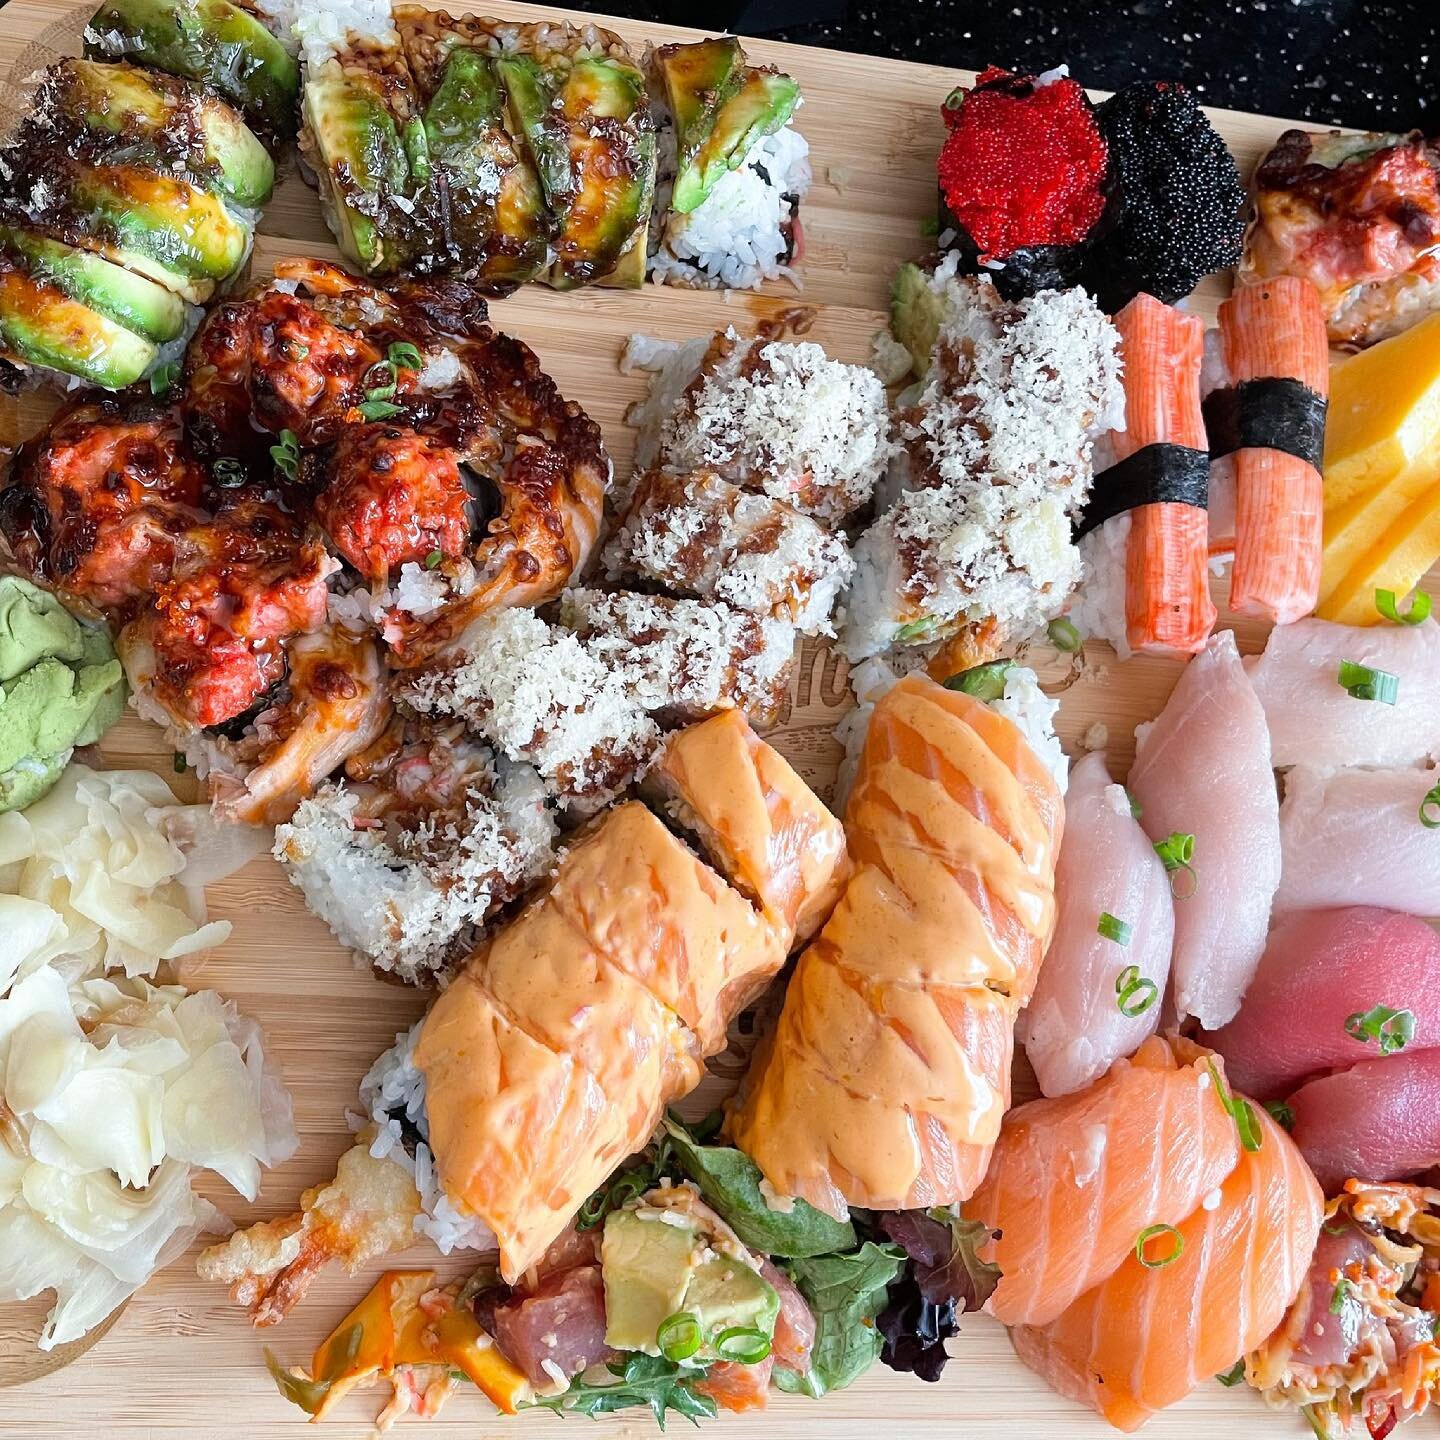 Happy International Sushi Day! 
My go to when eating out or eating in seems to always resort to sushi. A mix of sashimi, plain, specialty, and some baked/cooked rolls for the whole fam to enjoy. 

I&rsquo;m usually good with sashimi so don&rsquo;t be